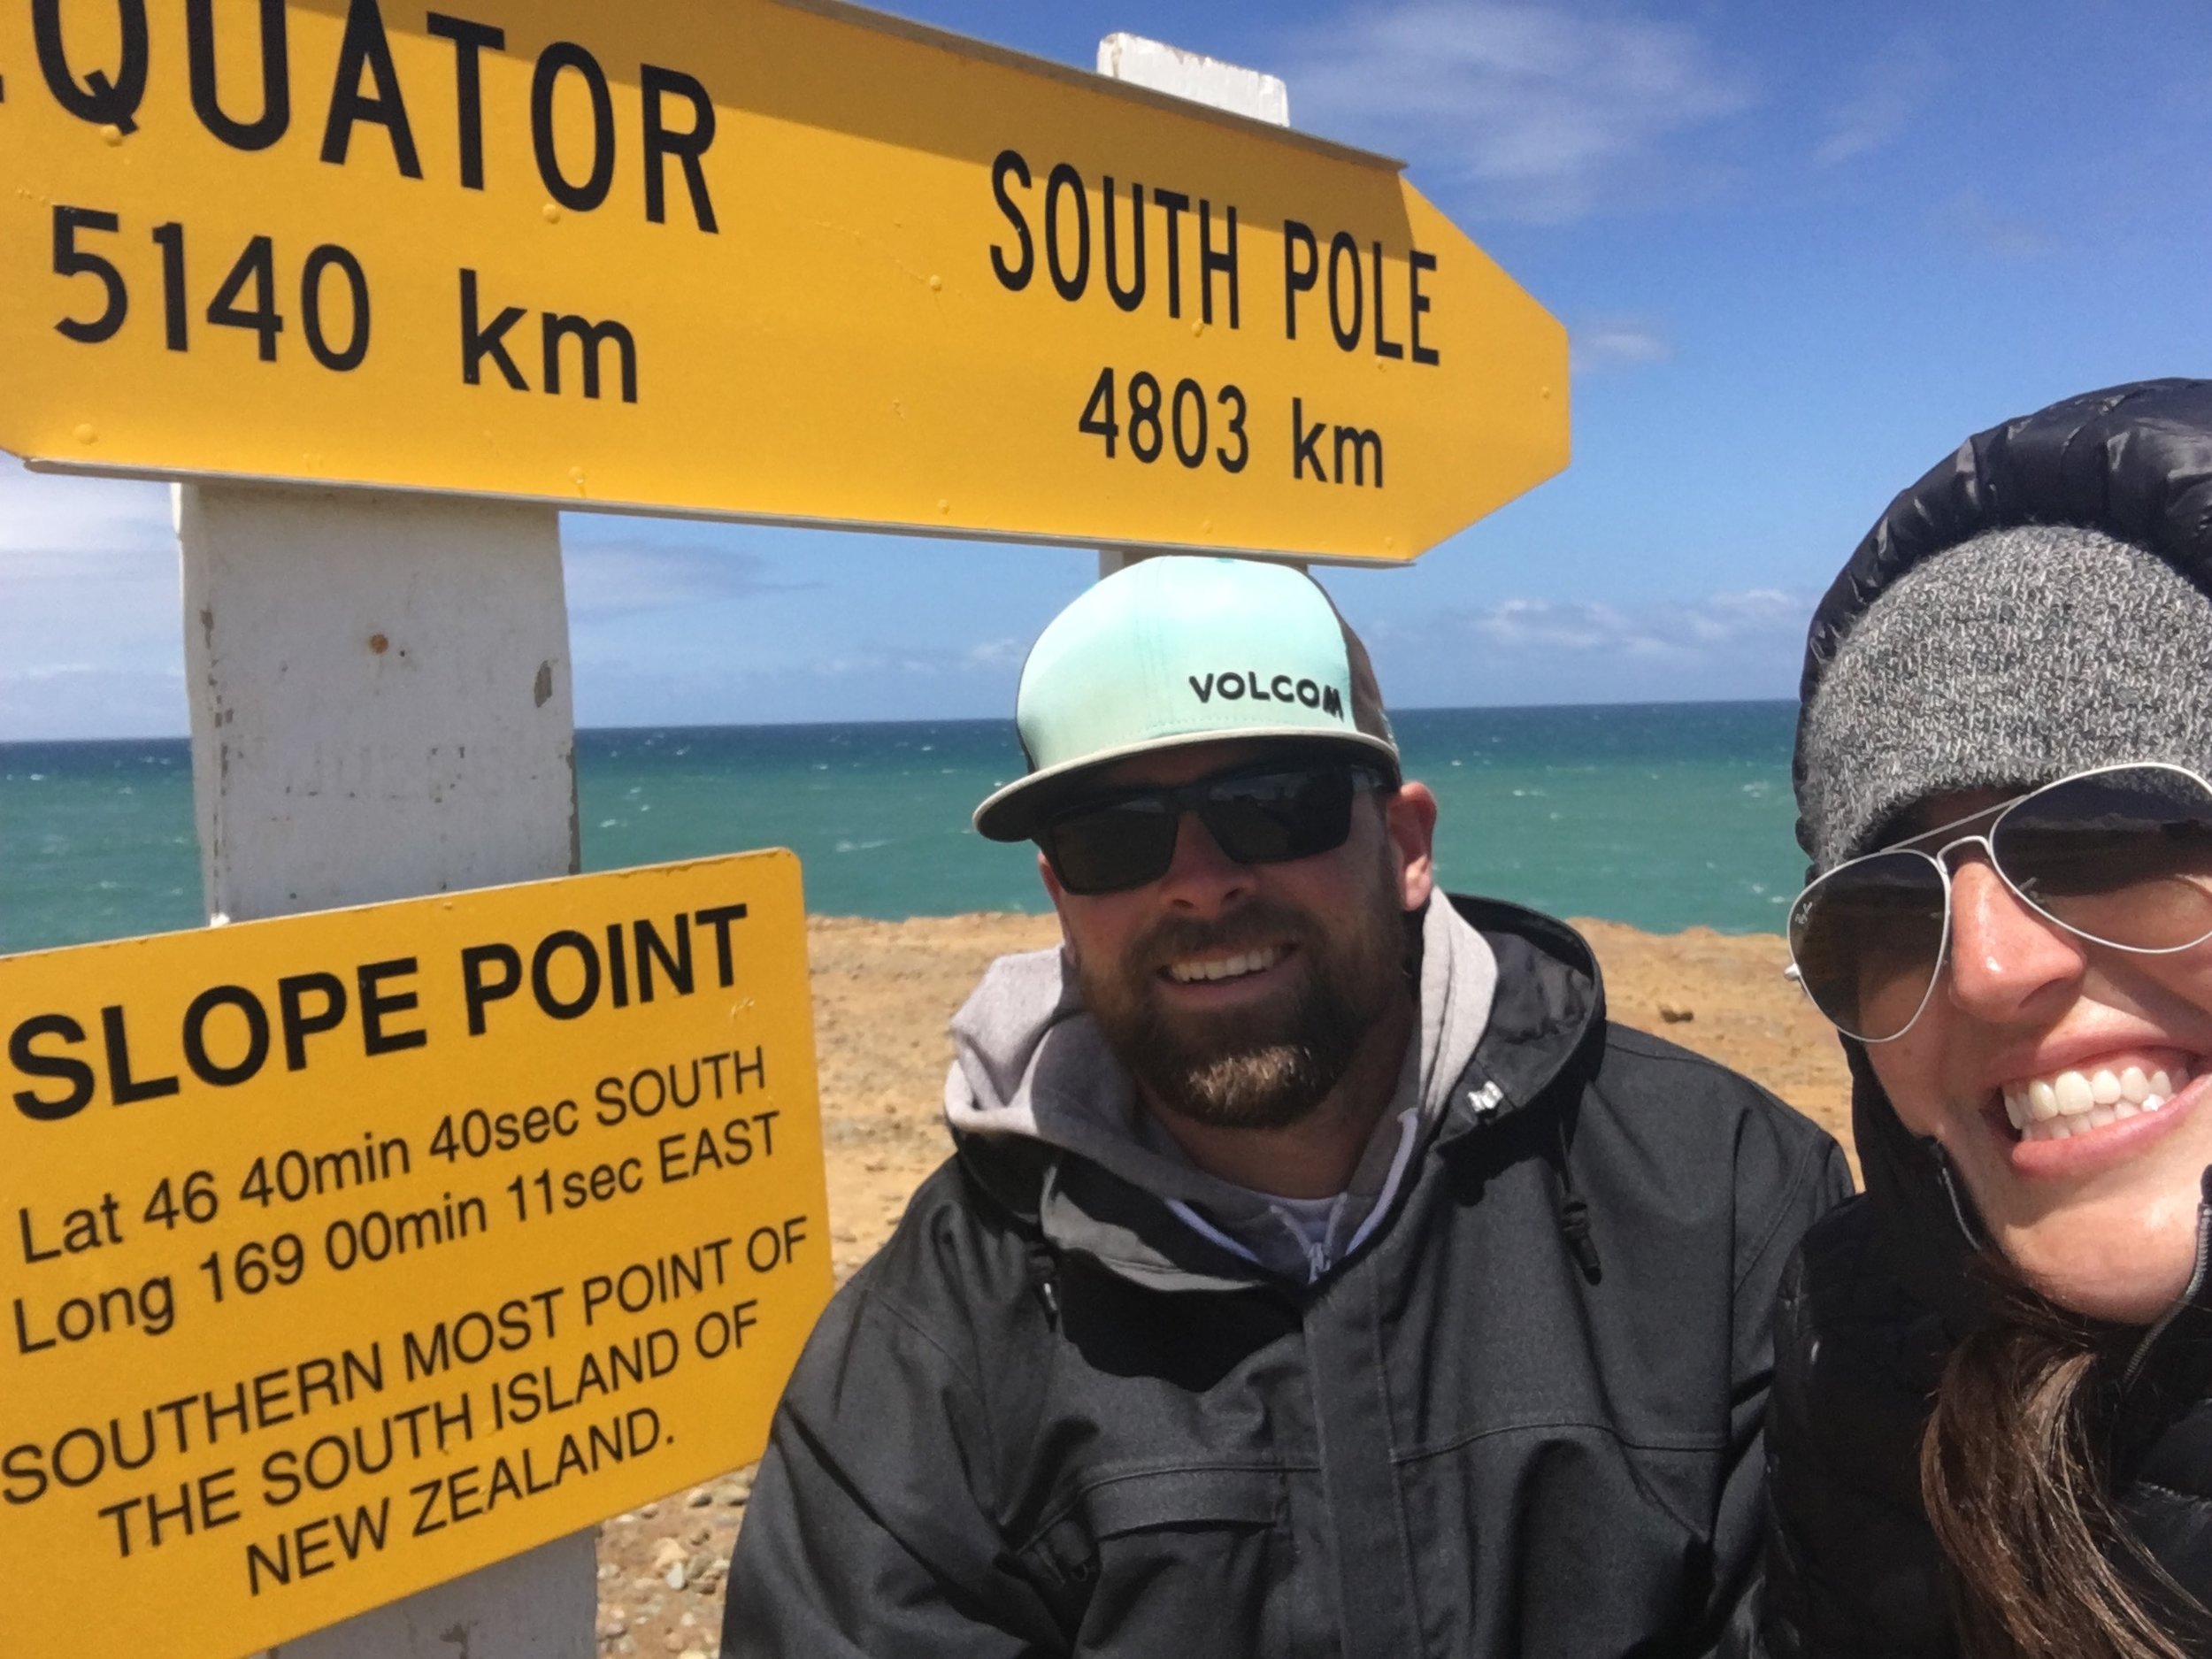   Slope Point  ("southern-most point of the South Island"),  Southland Region  